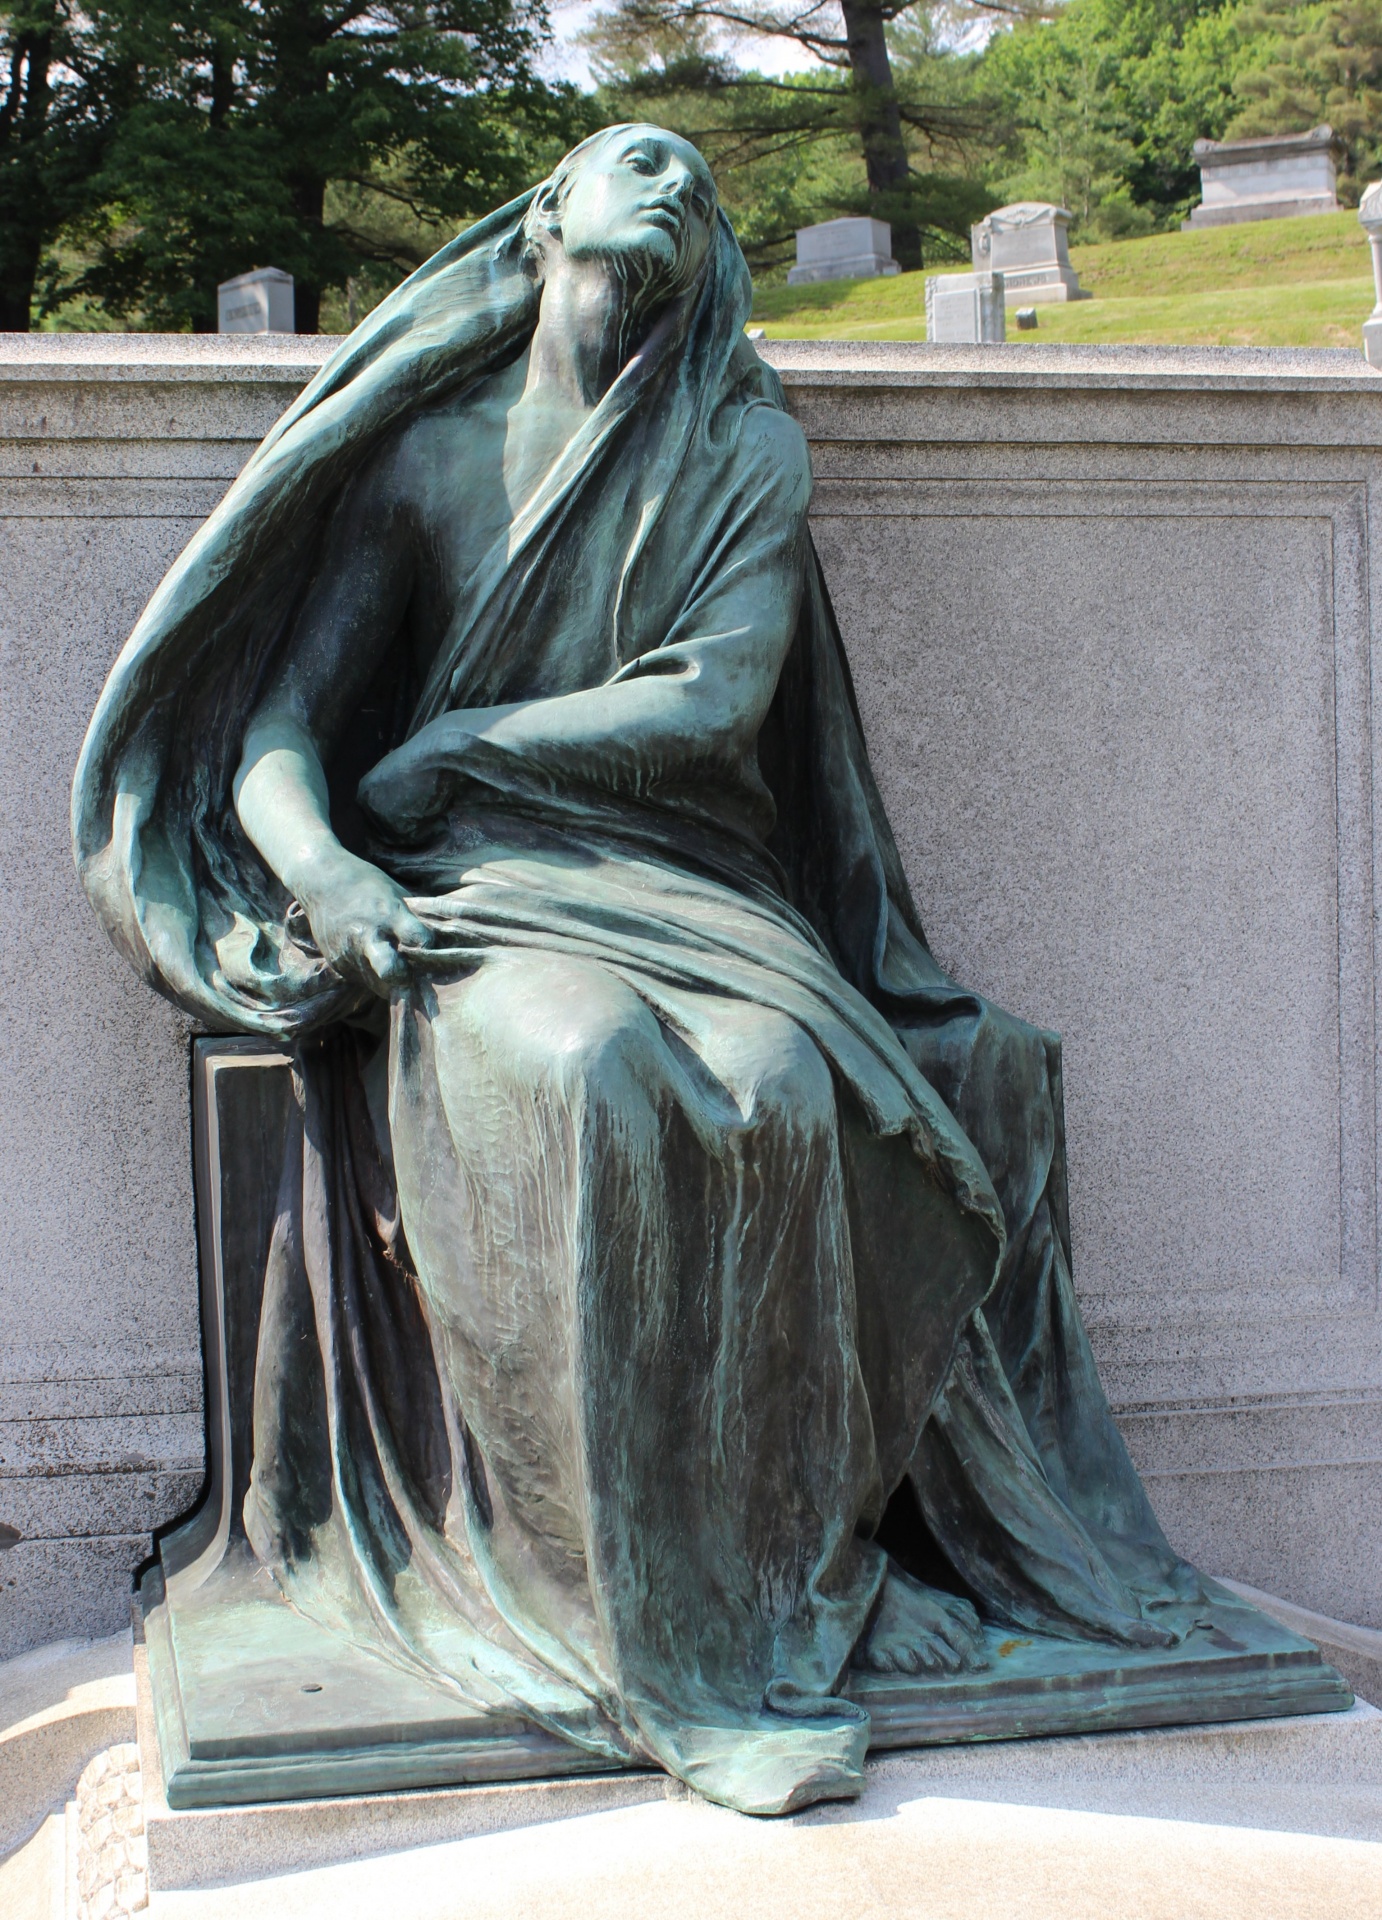 A copper statue located at Green Mount Cemetery in Montpelier, Vermont.